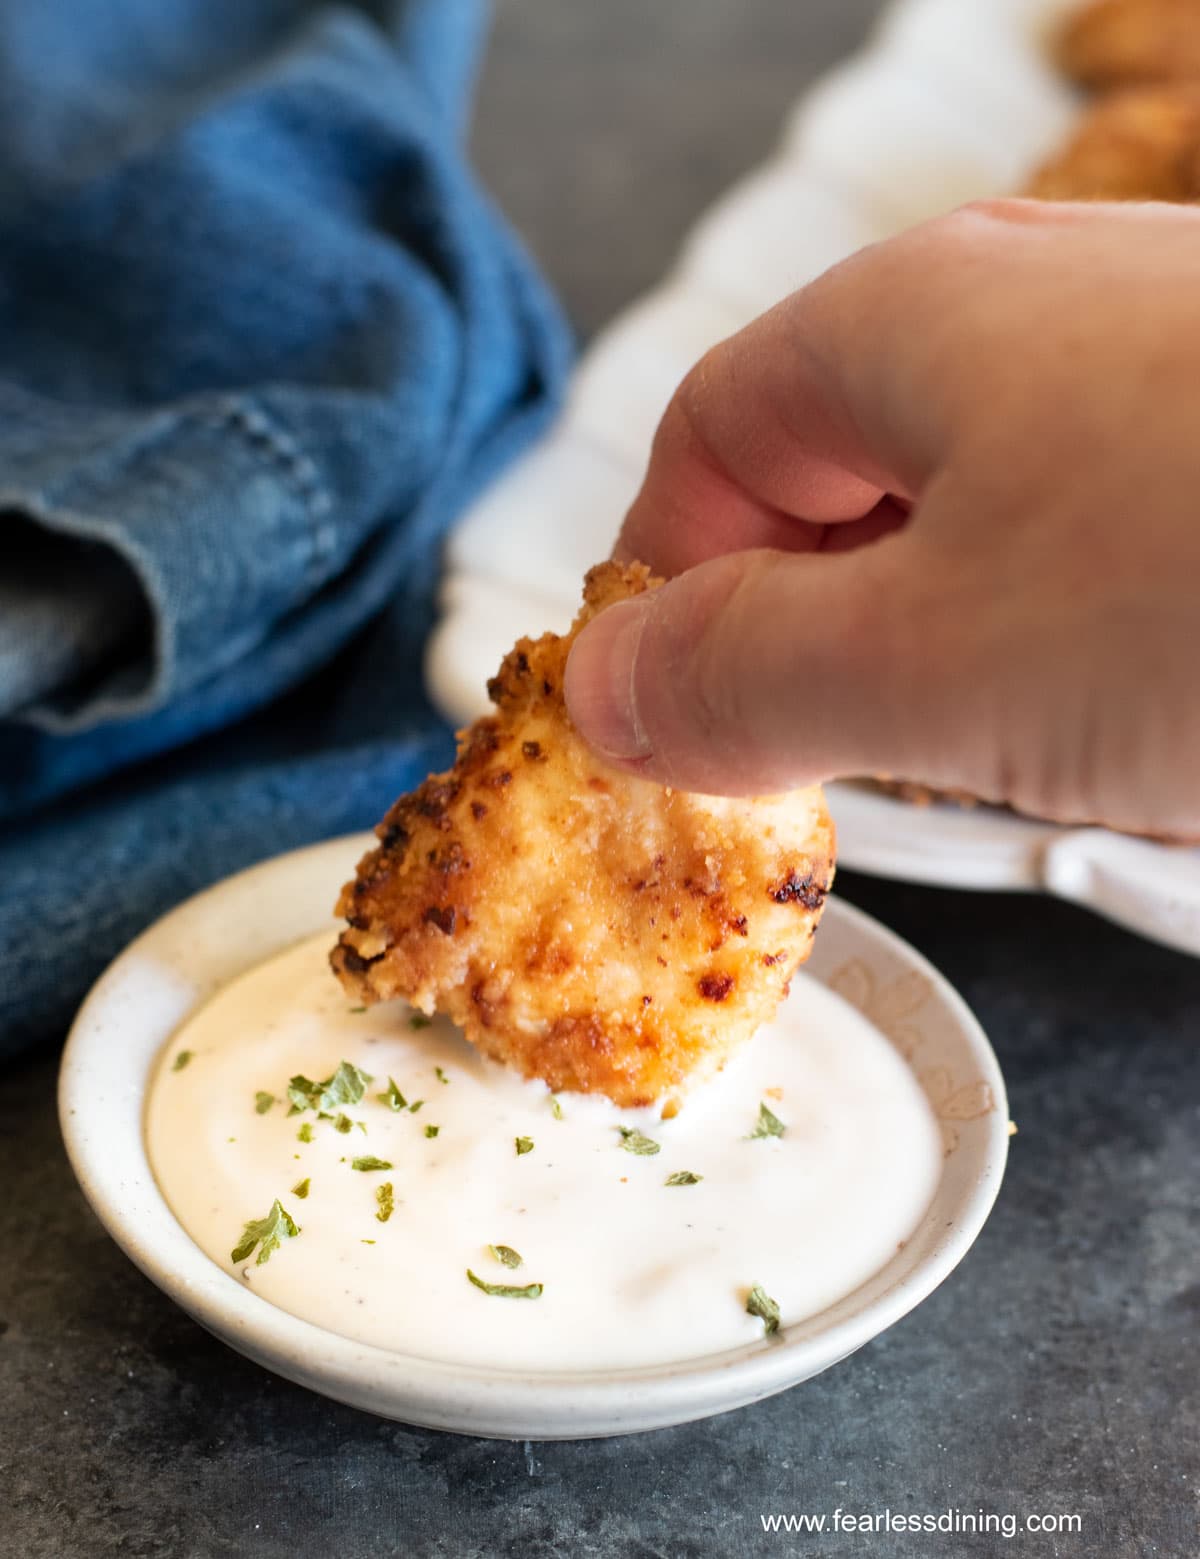 dipping the gluten free nugget in ranch dressing